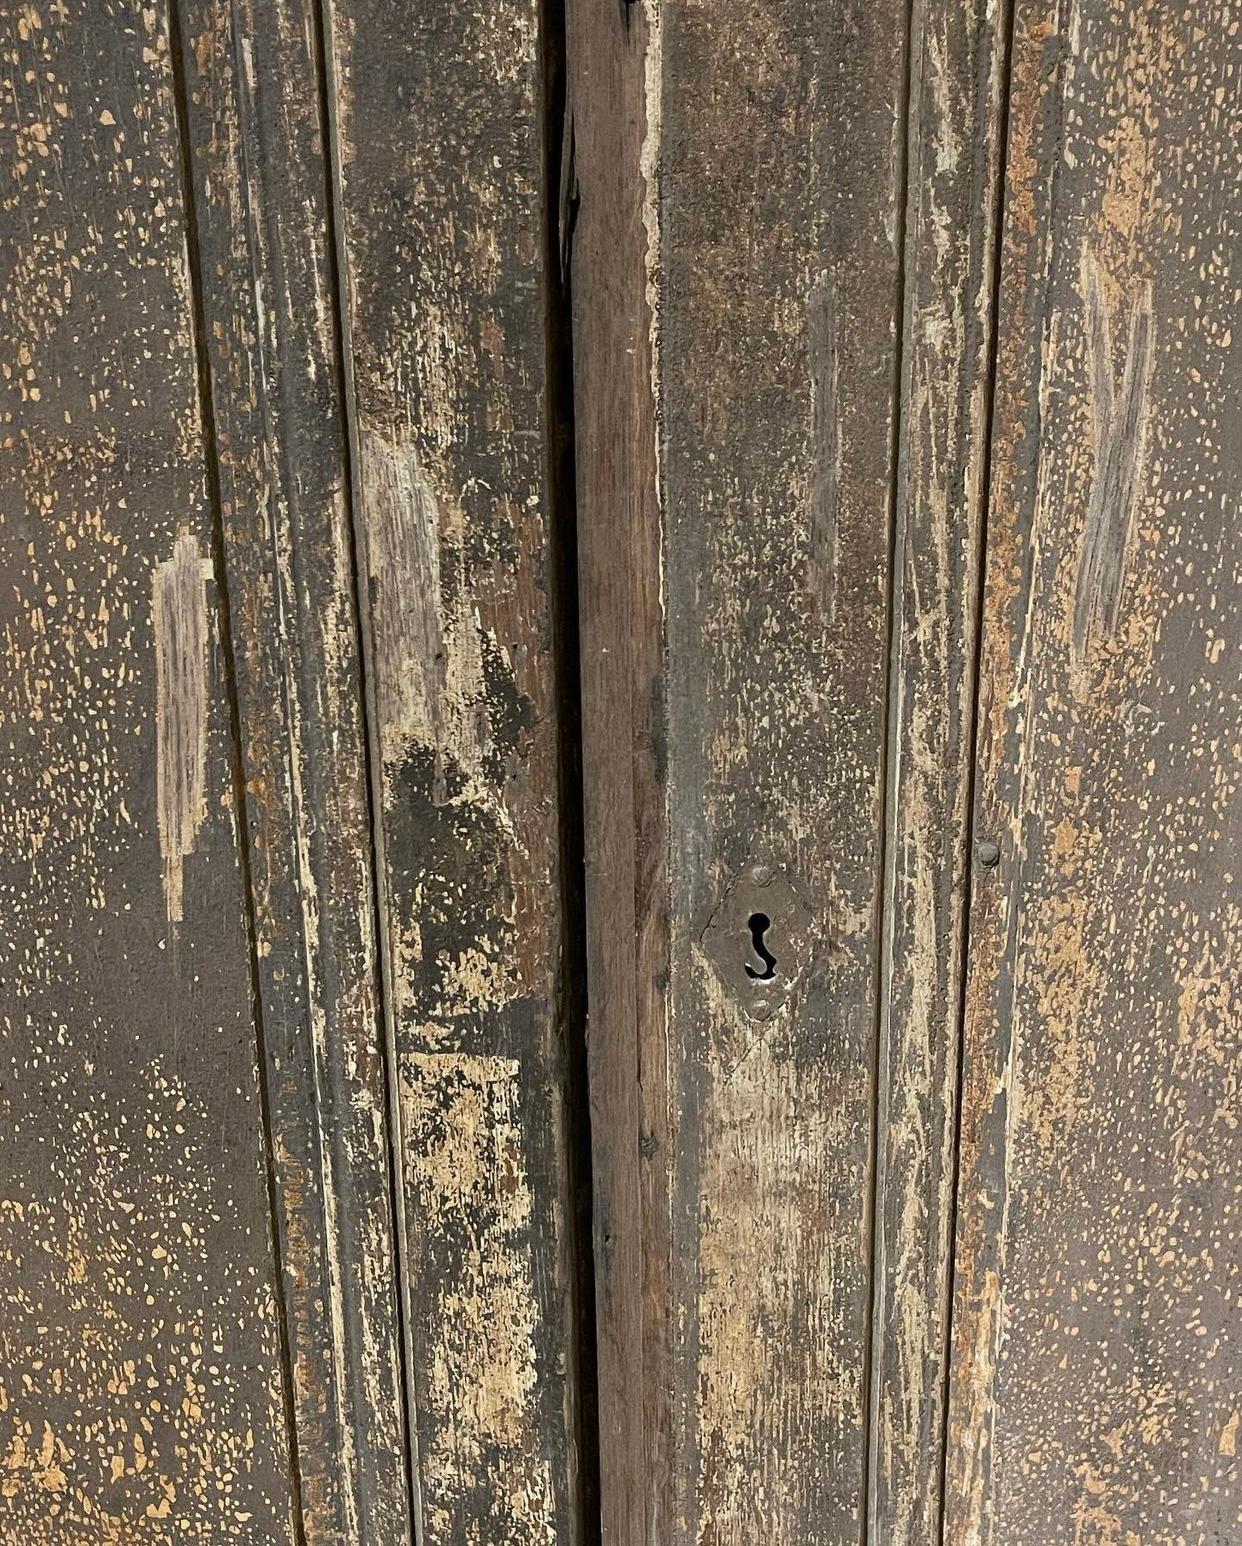 A superb pair of 18th Century French Chateau Doors from the Louis XV period. As can be seen from the photos in original condition. Highly decorative and a great look.
Each Door 238 x 95 cm.